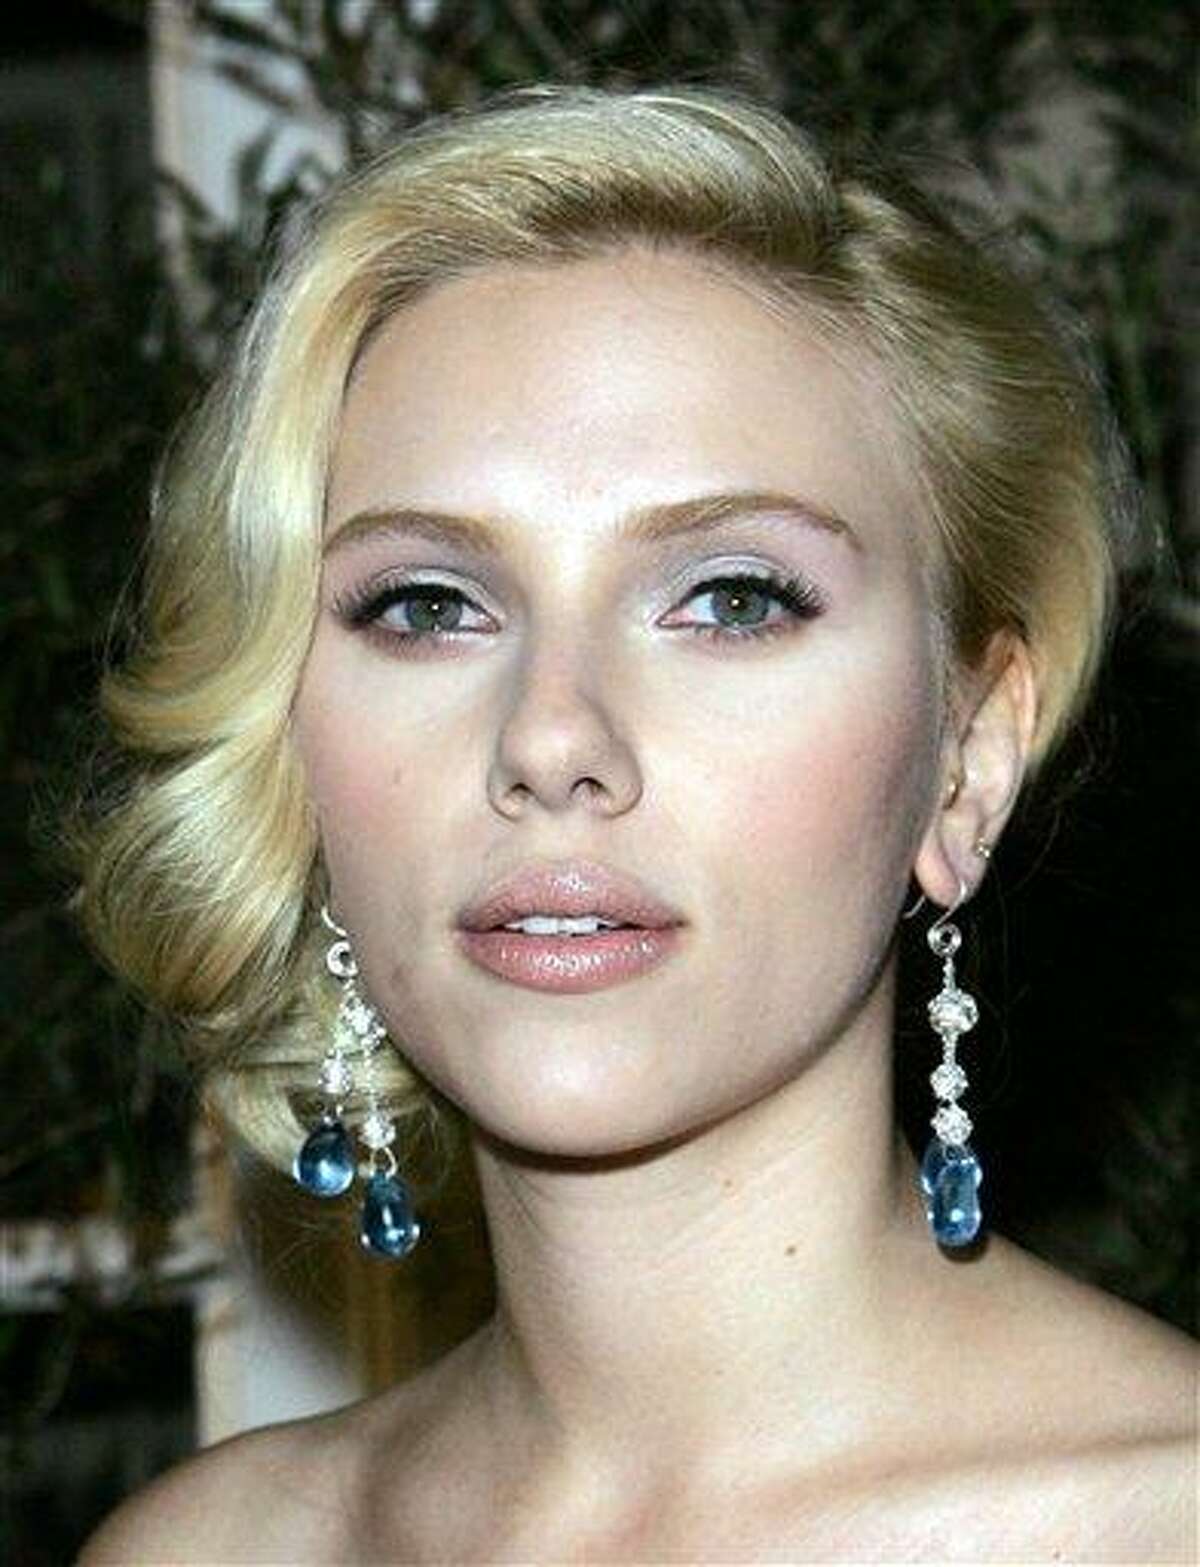 FILE - In this Oct. 15, 2007 file photo, actress Scarlett Johansson arrives at Elle magazine's 14th Annual Women in Hollywood tribute in Los Angeles. (AP Photo/Kevork Djansezian, File)